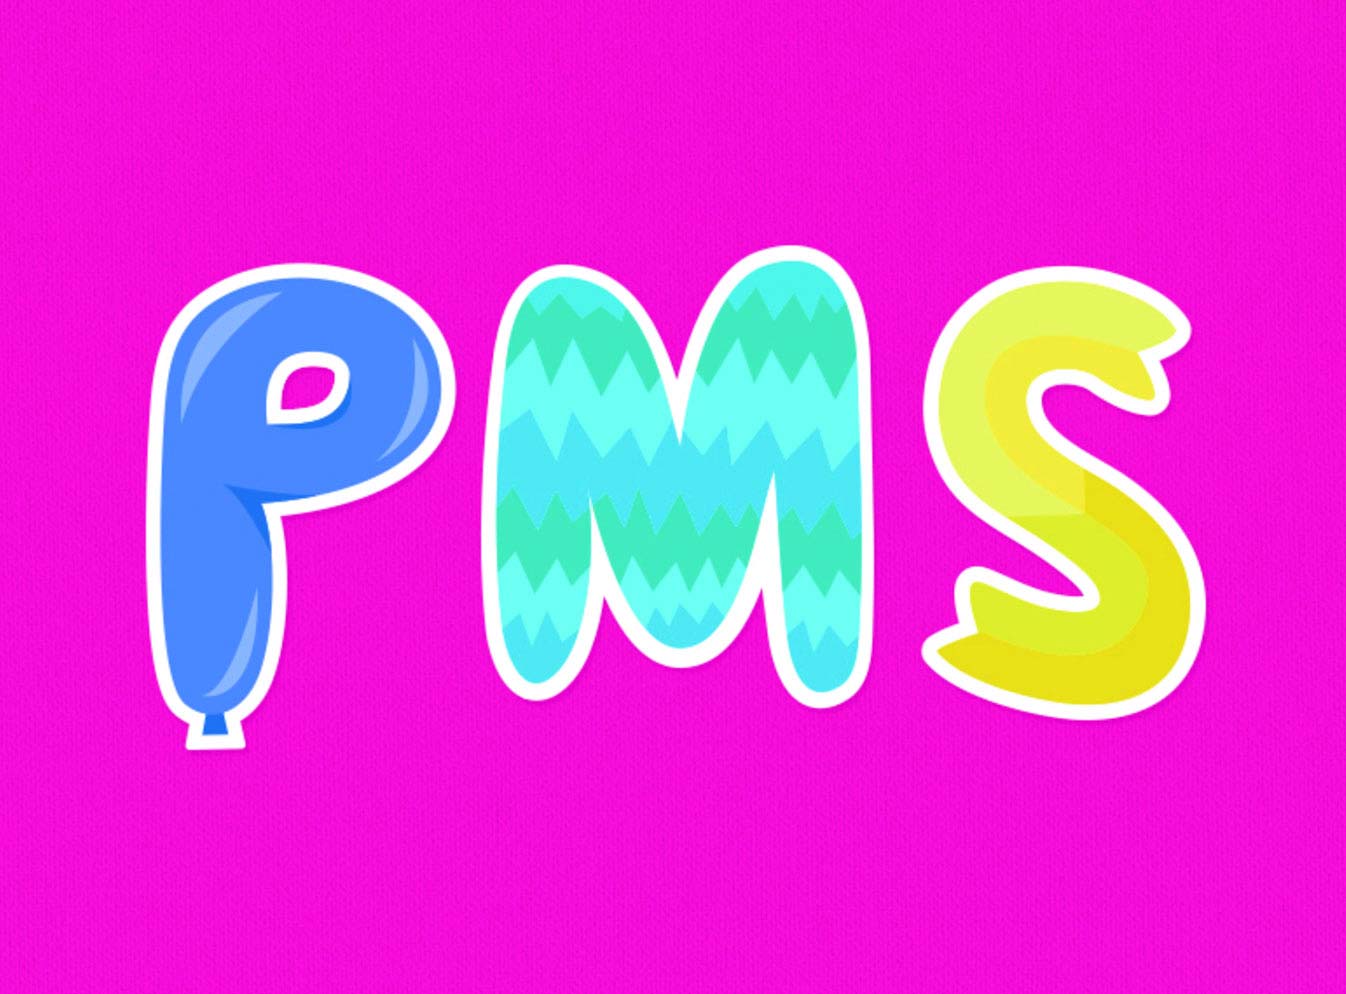 PMS spelled in colorful party balloons over plain hot pink background